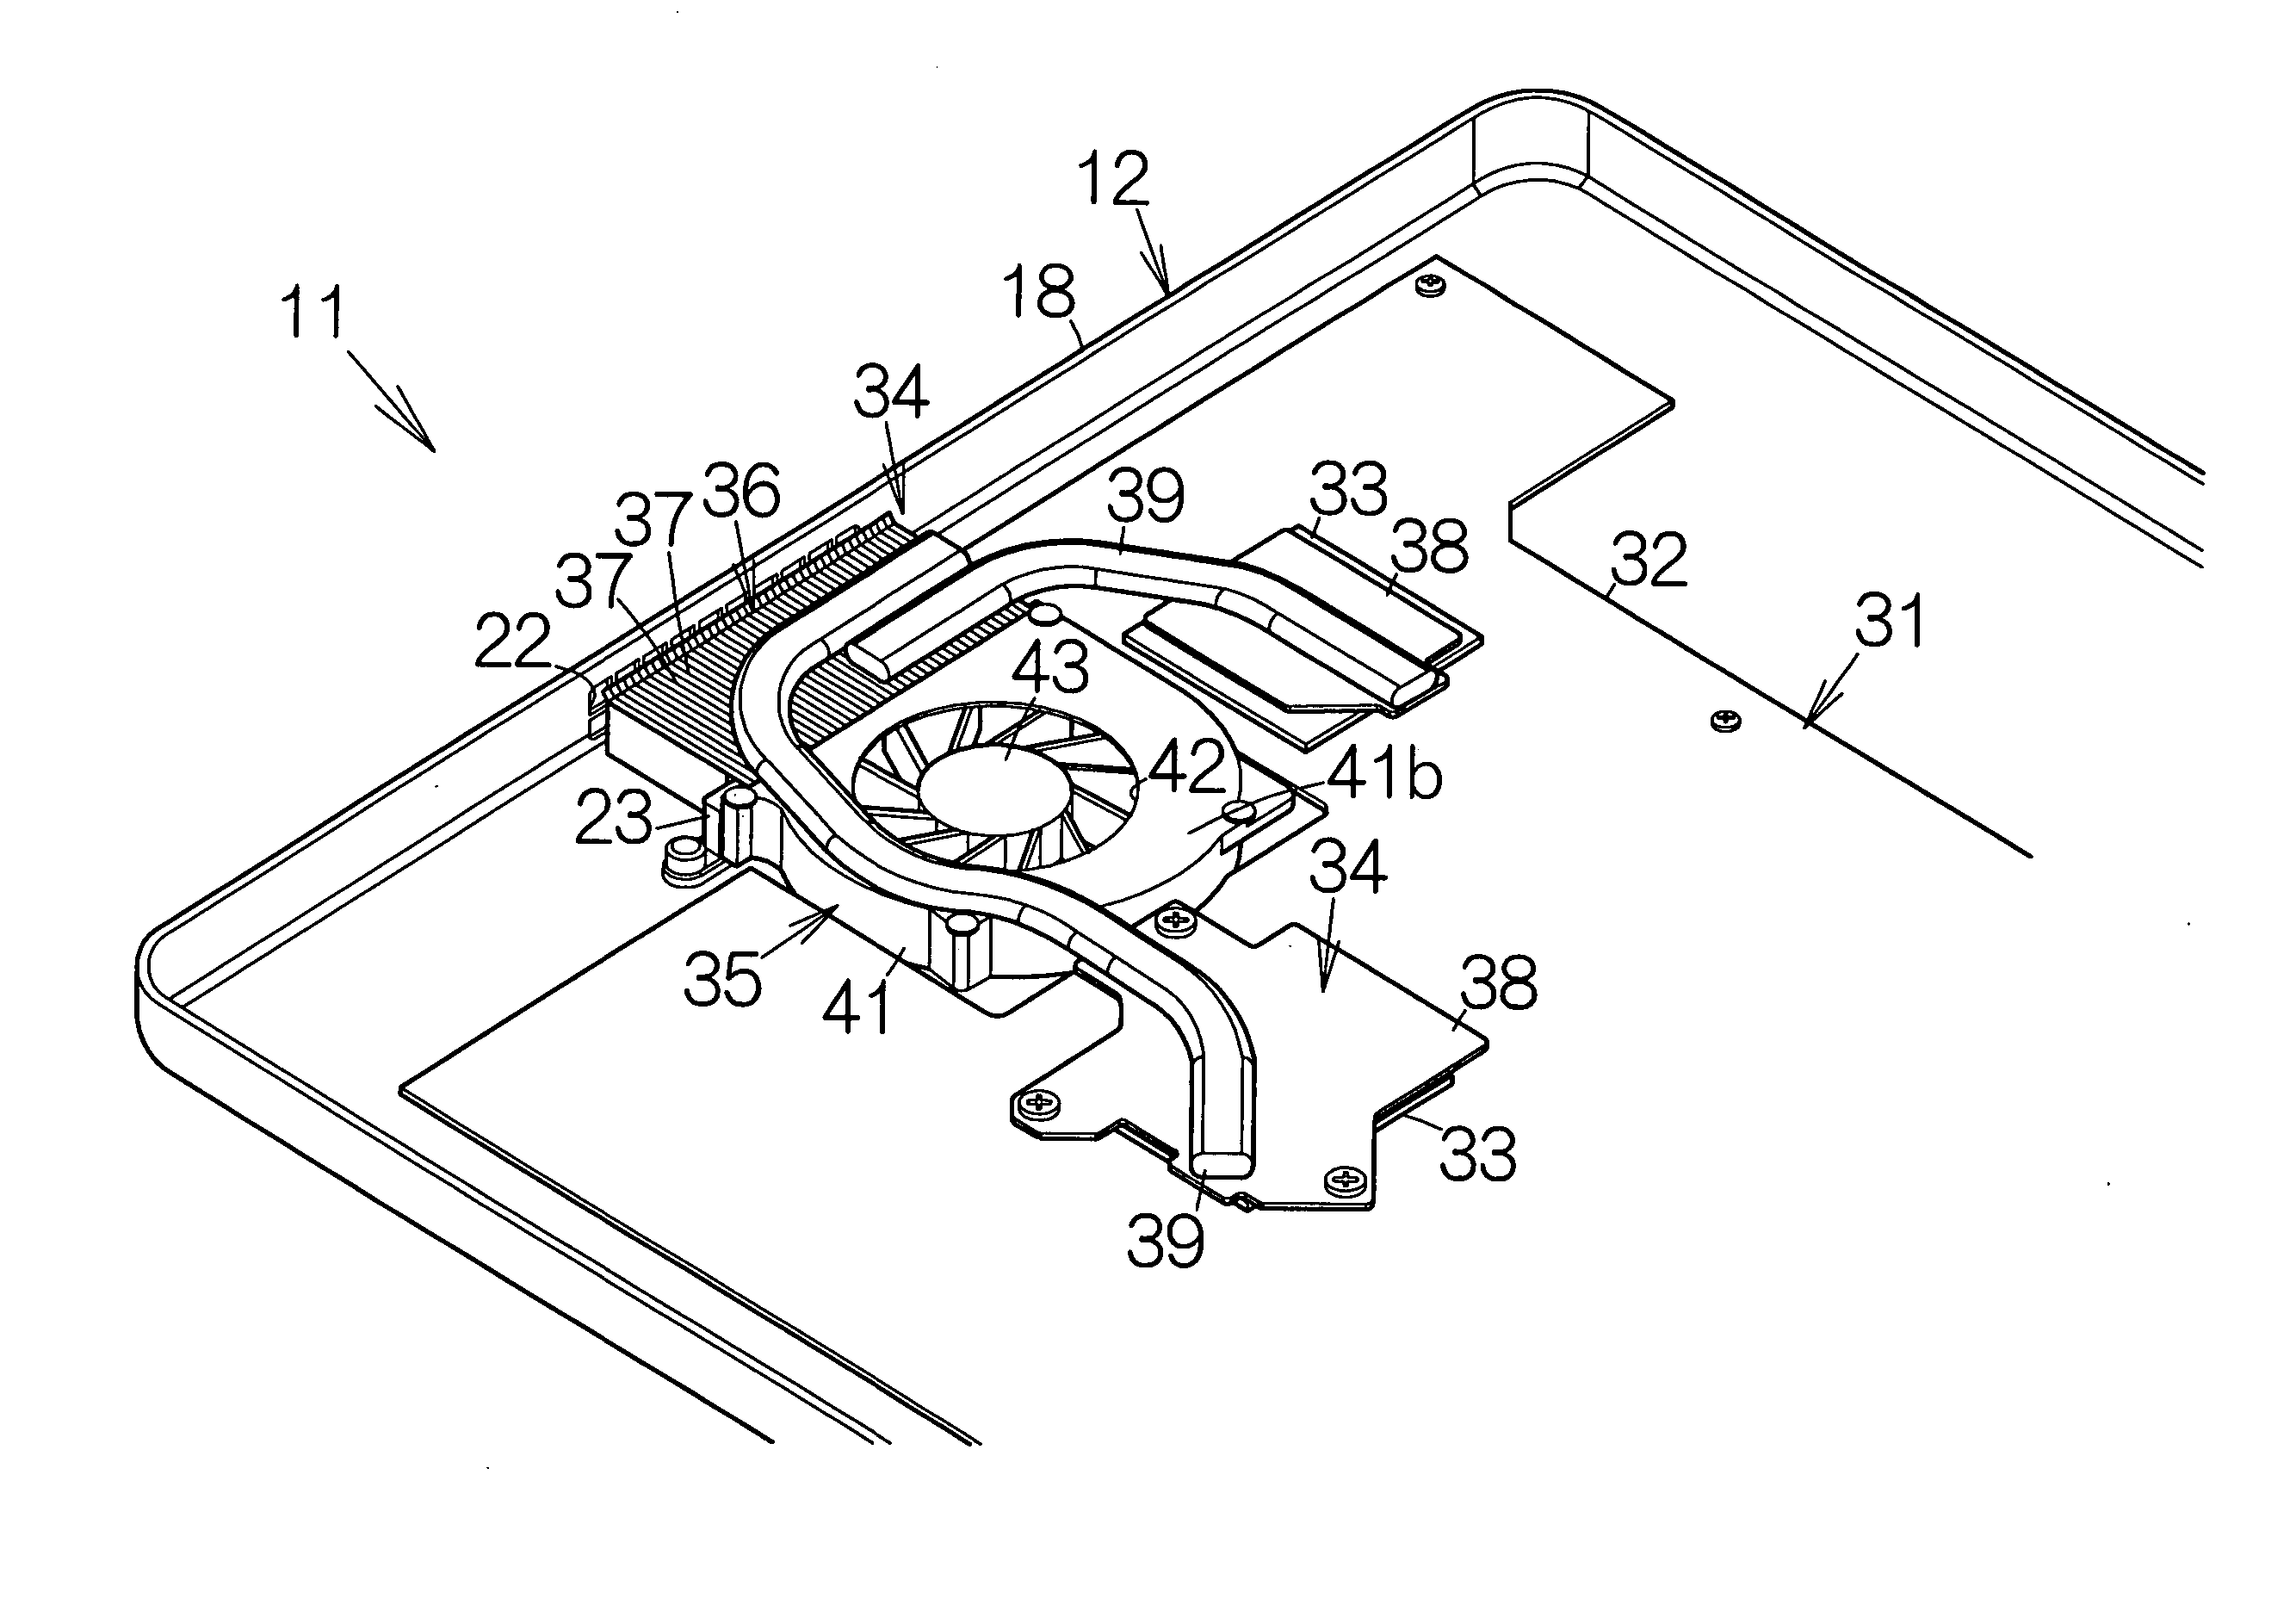 Electronic apparatus including removable dust catcher